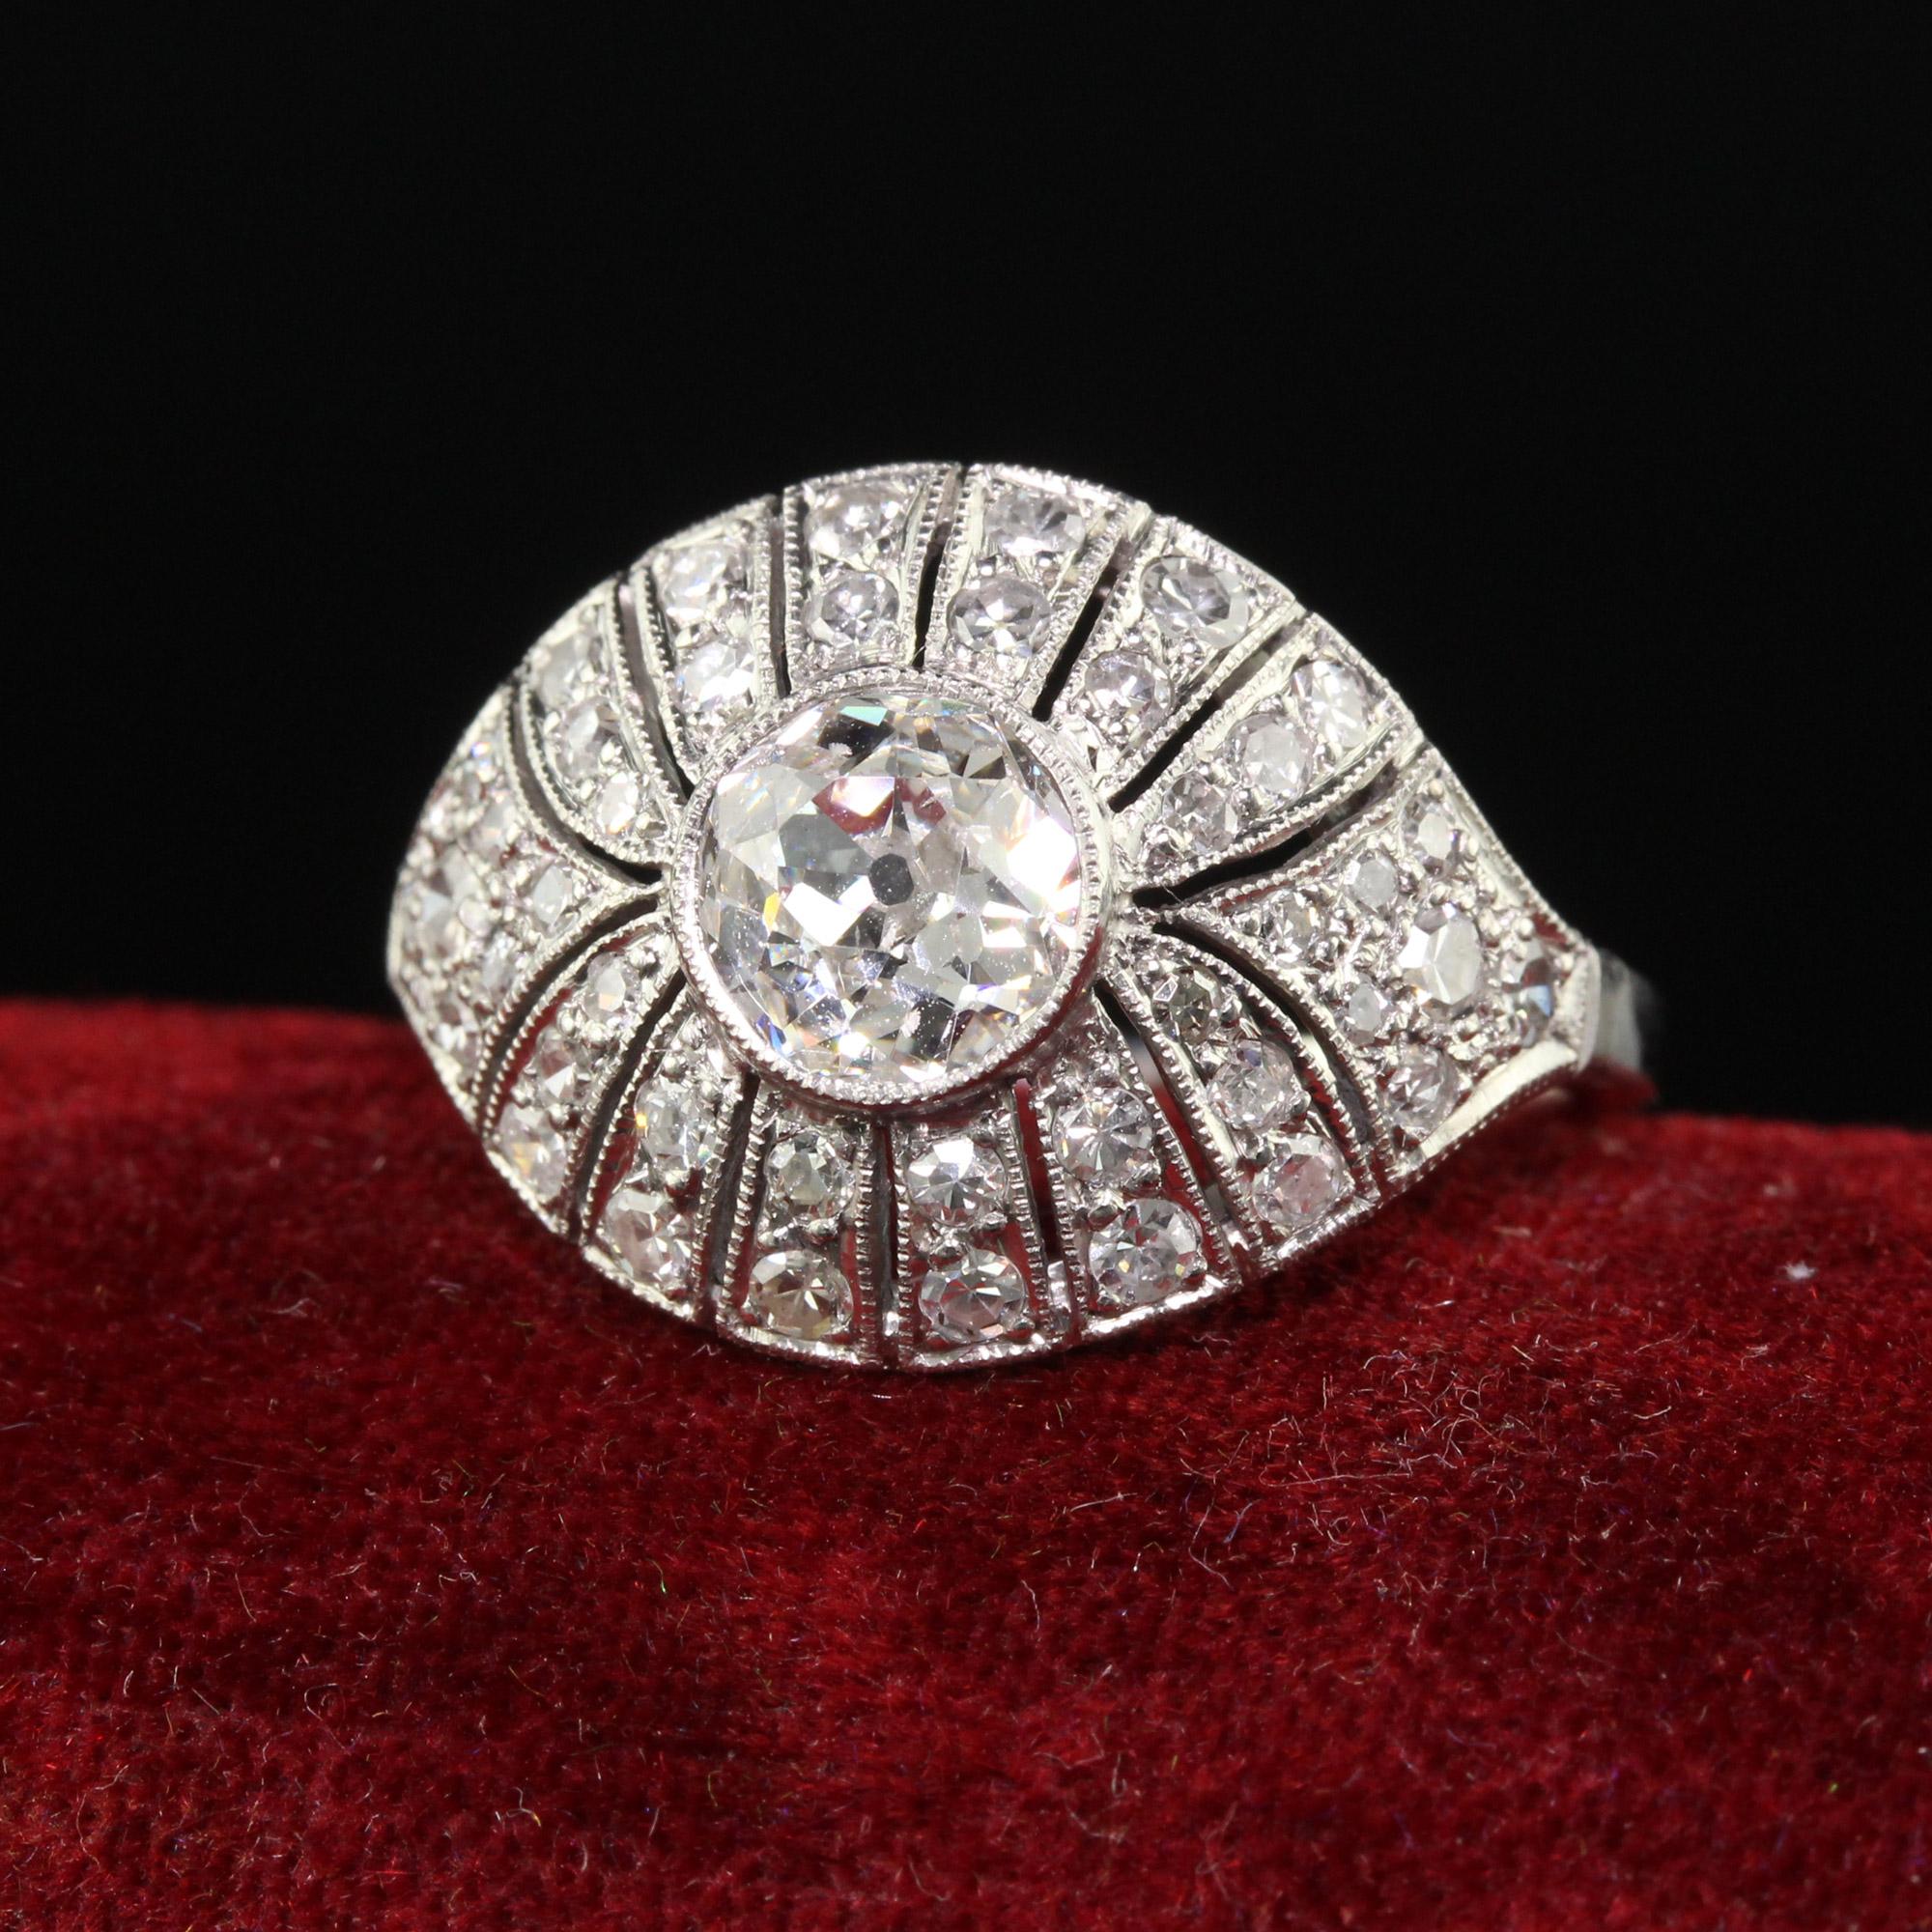 Beautiful Antique Art Deco Platinum Old Euro Diamond Filigree Engagement Ring. This beautiful shield ring is crafted in platinum. The center holds a chunky old European cut diamond that is set in a gorgeous art deco mounting that has single cut